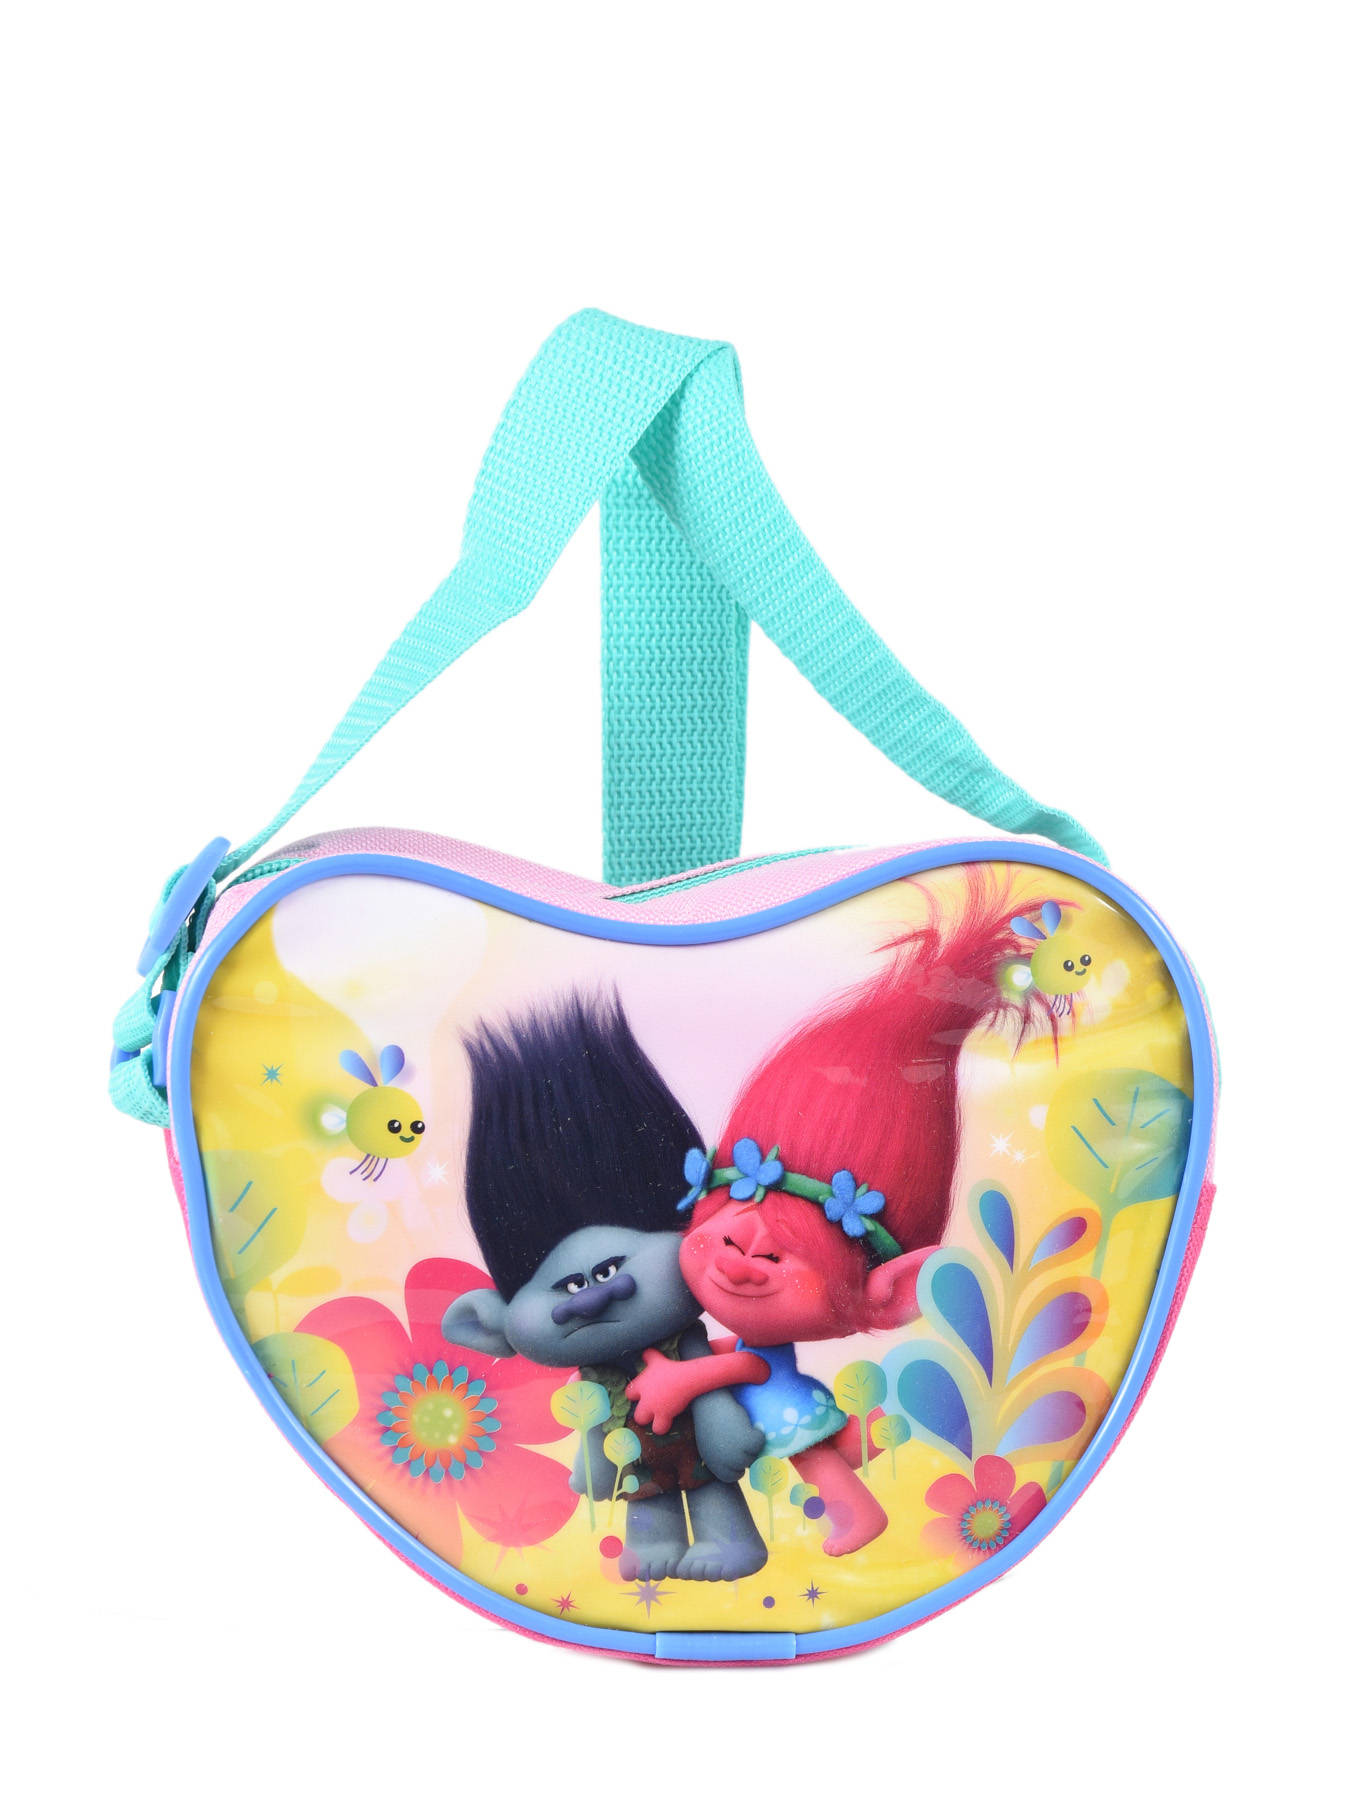 Cute Trolls 7 inch mini Satin Handbag with Rope Handle Great Gift for Girls  ,Toy Pouch or Make up Bag - Walmart.com